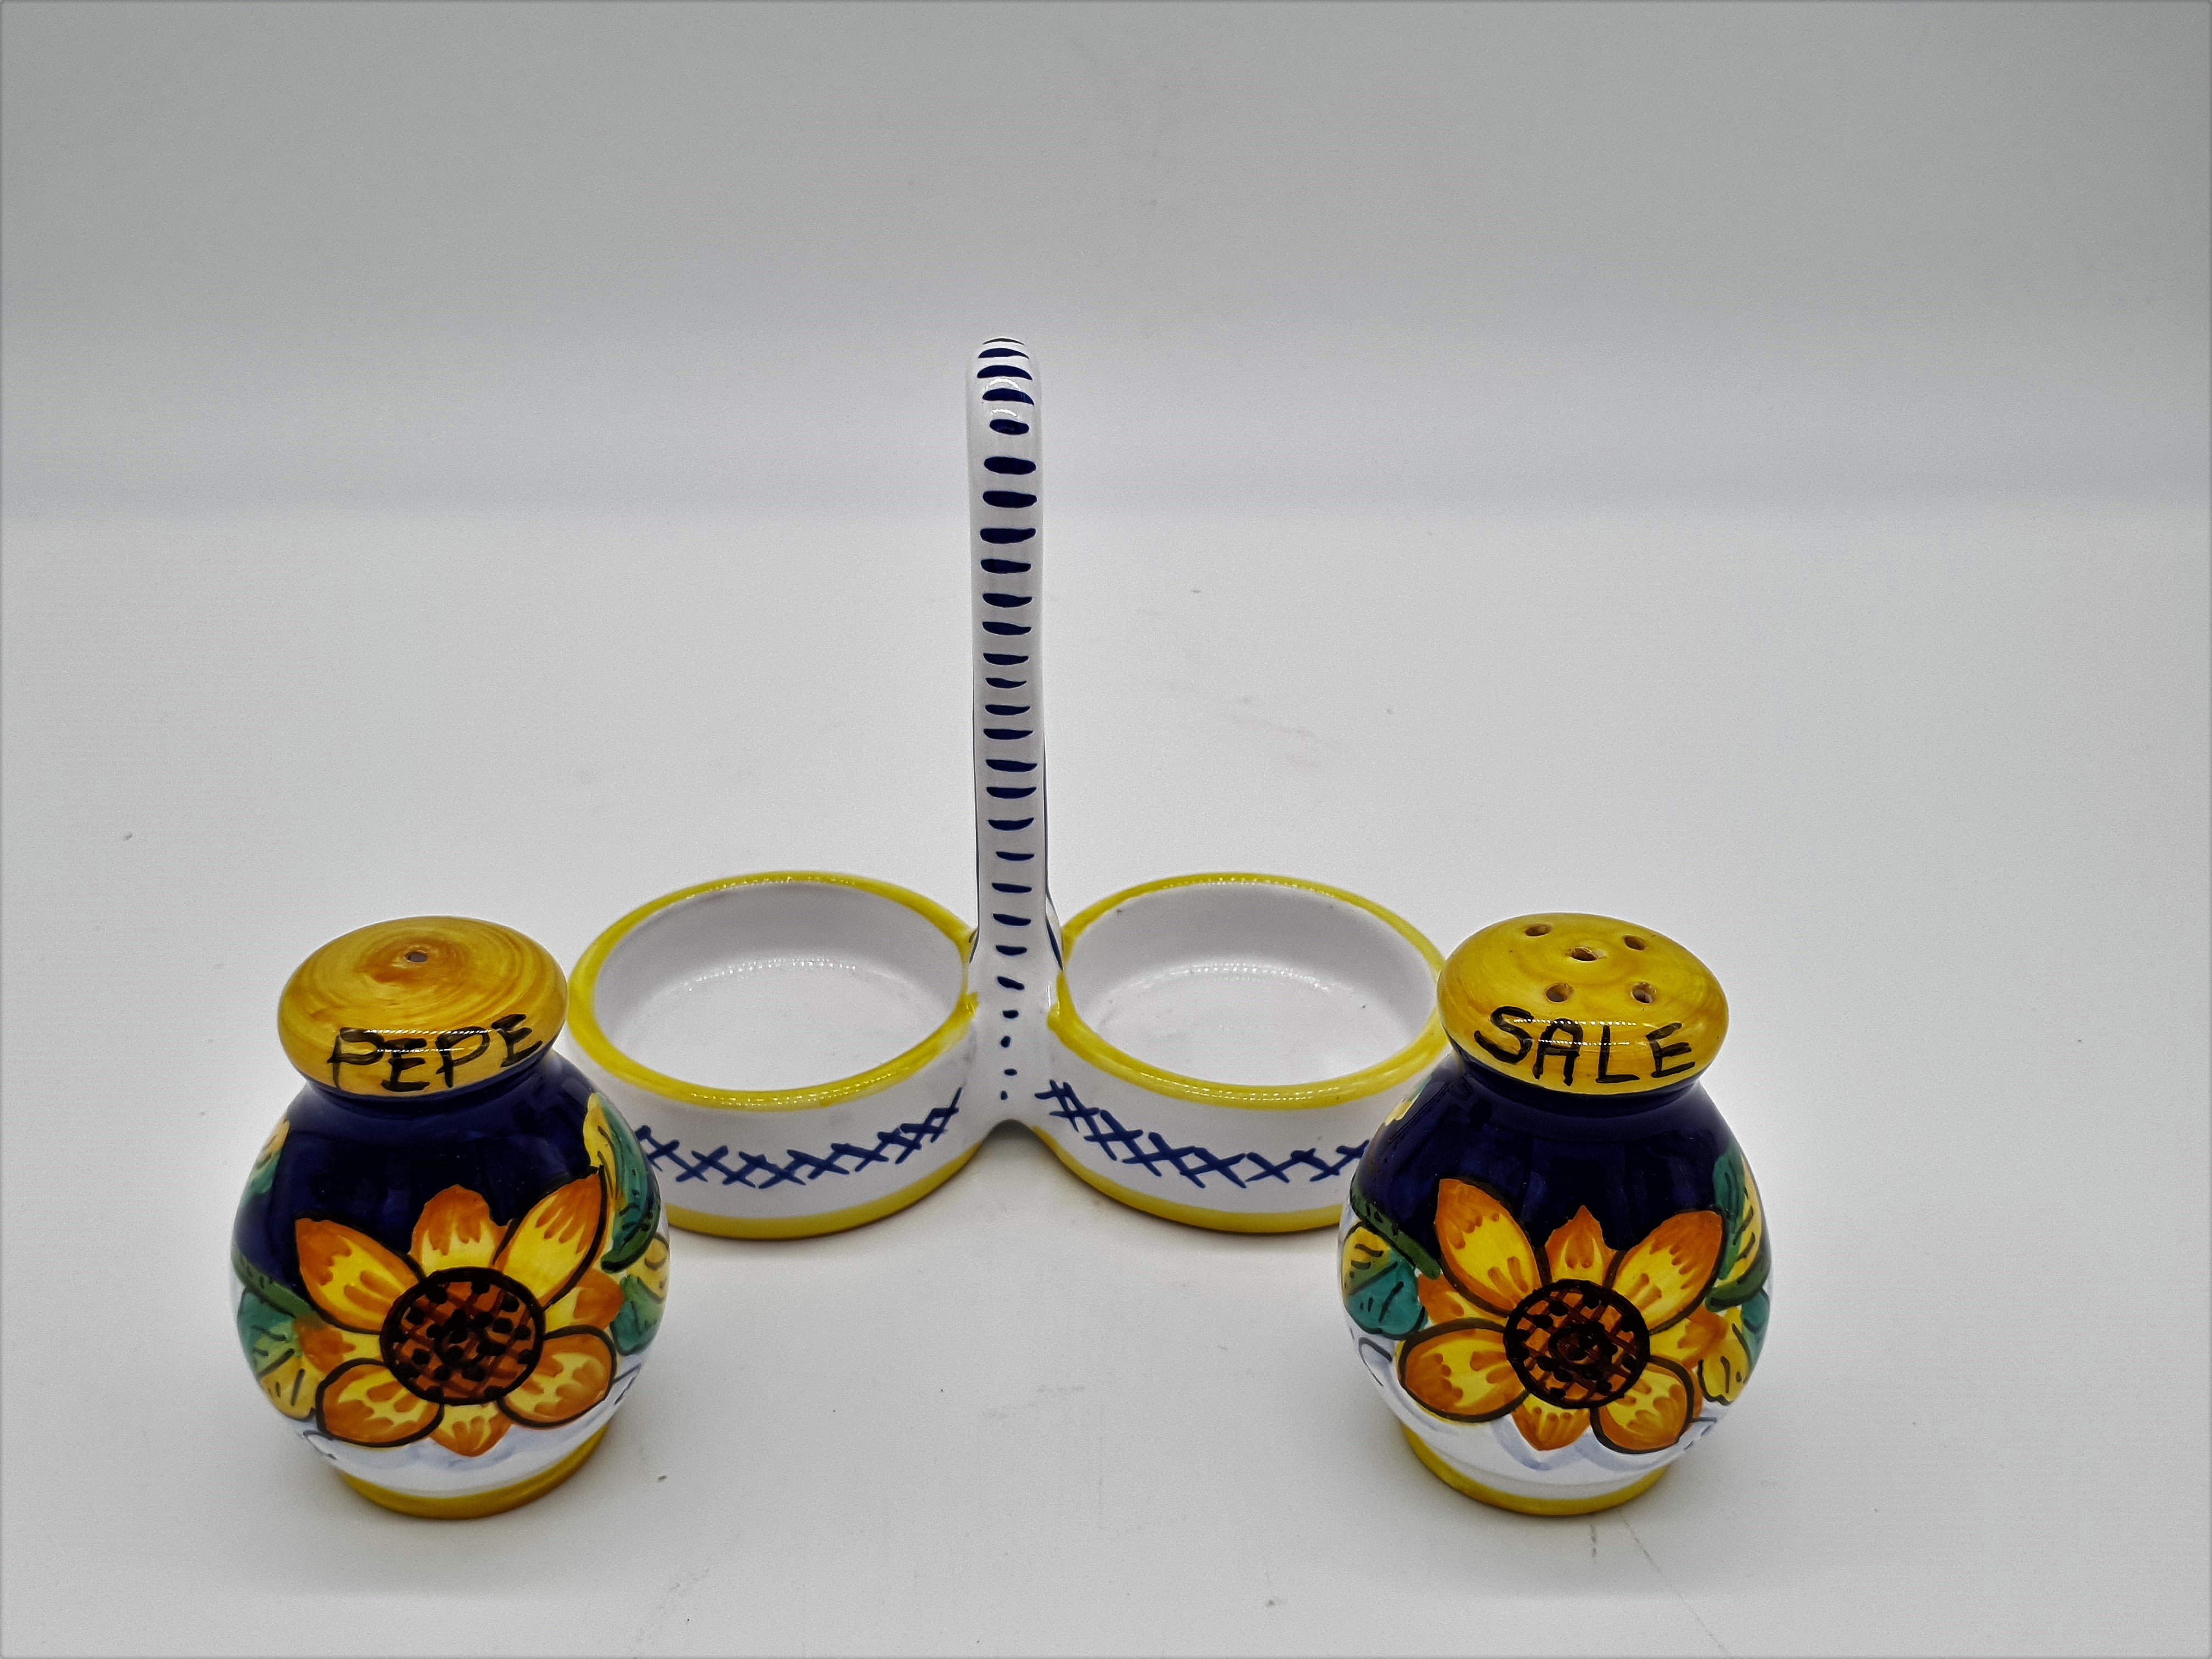 Salt and Pepper Shakers with Gambino Sunflowers Decor